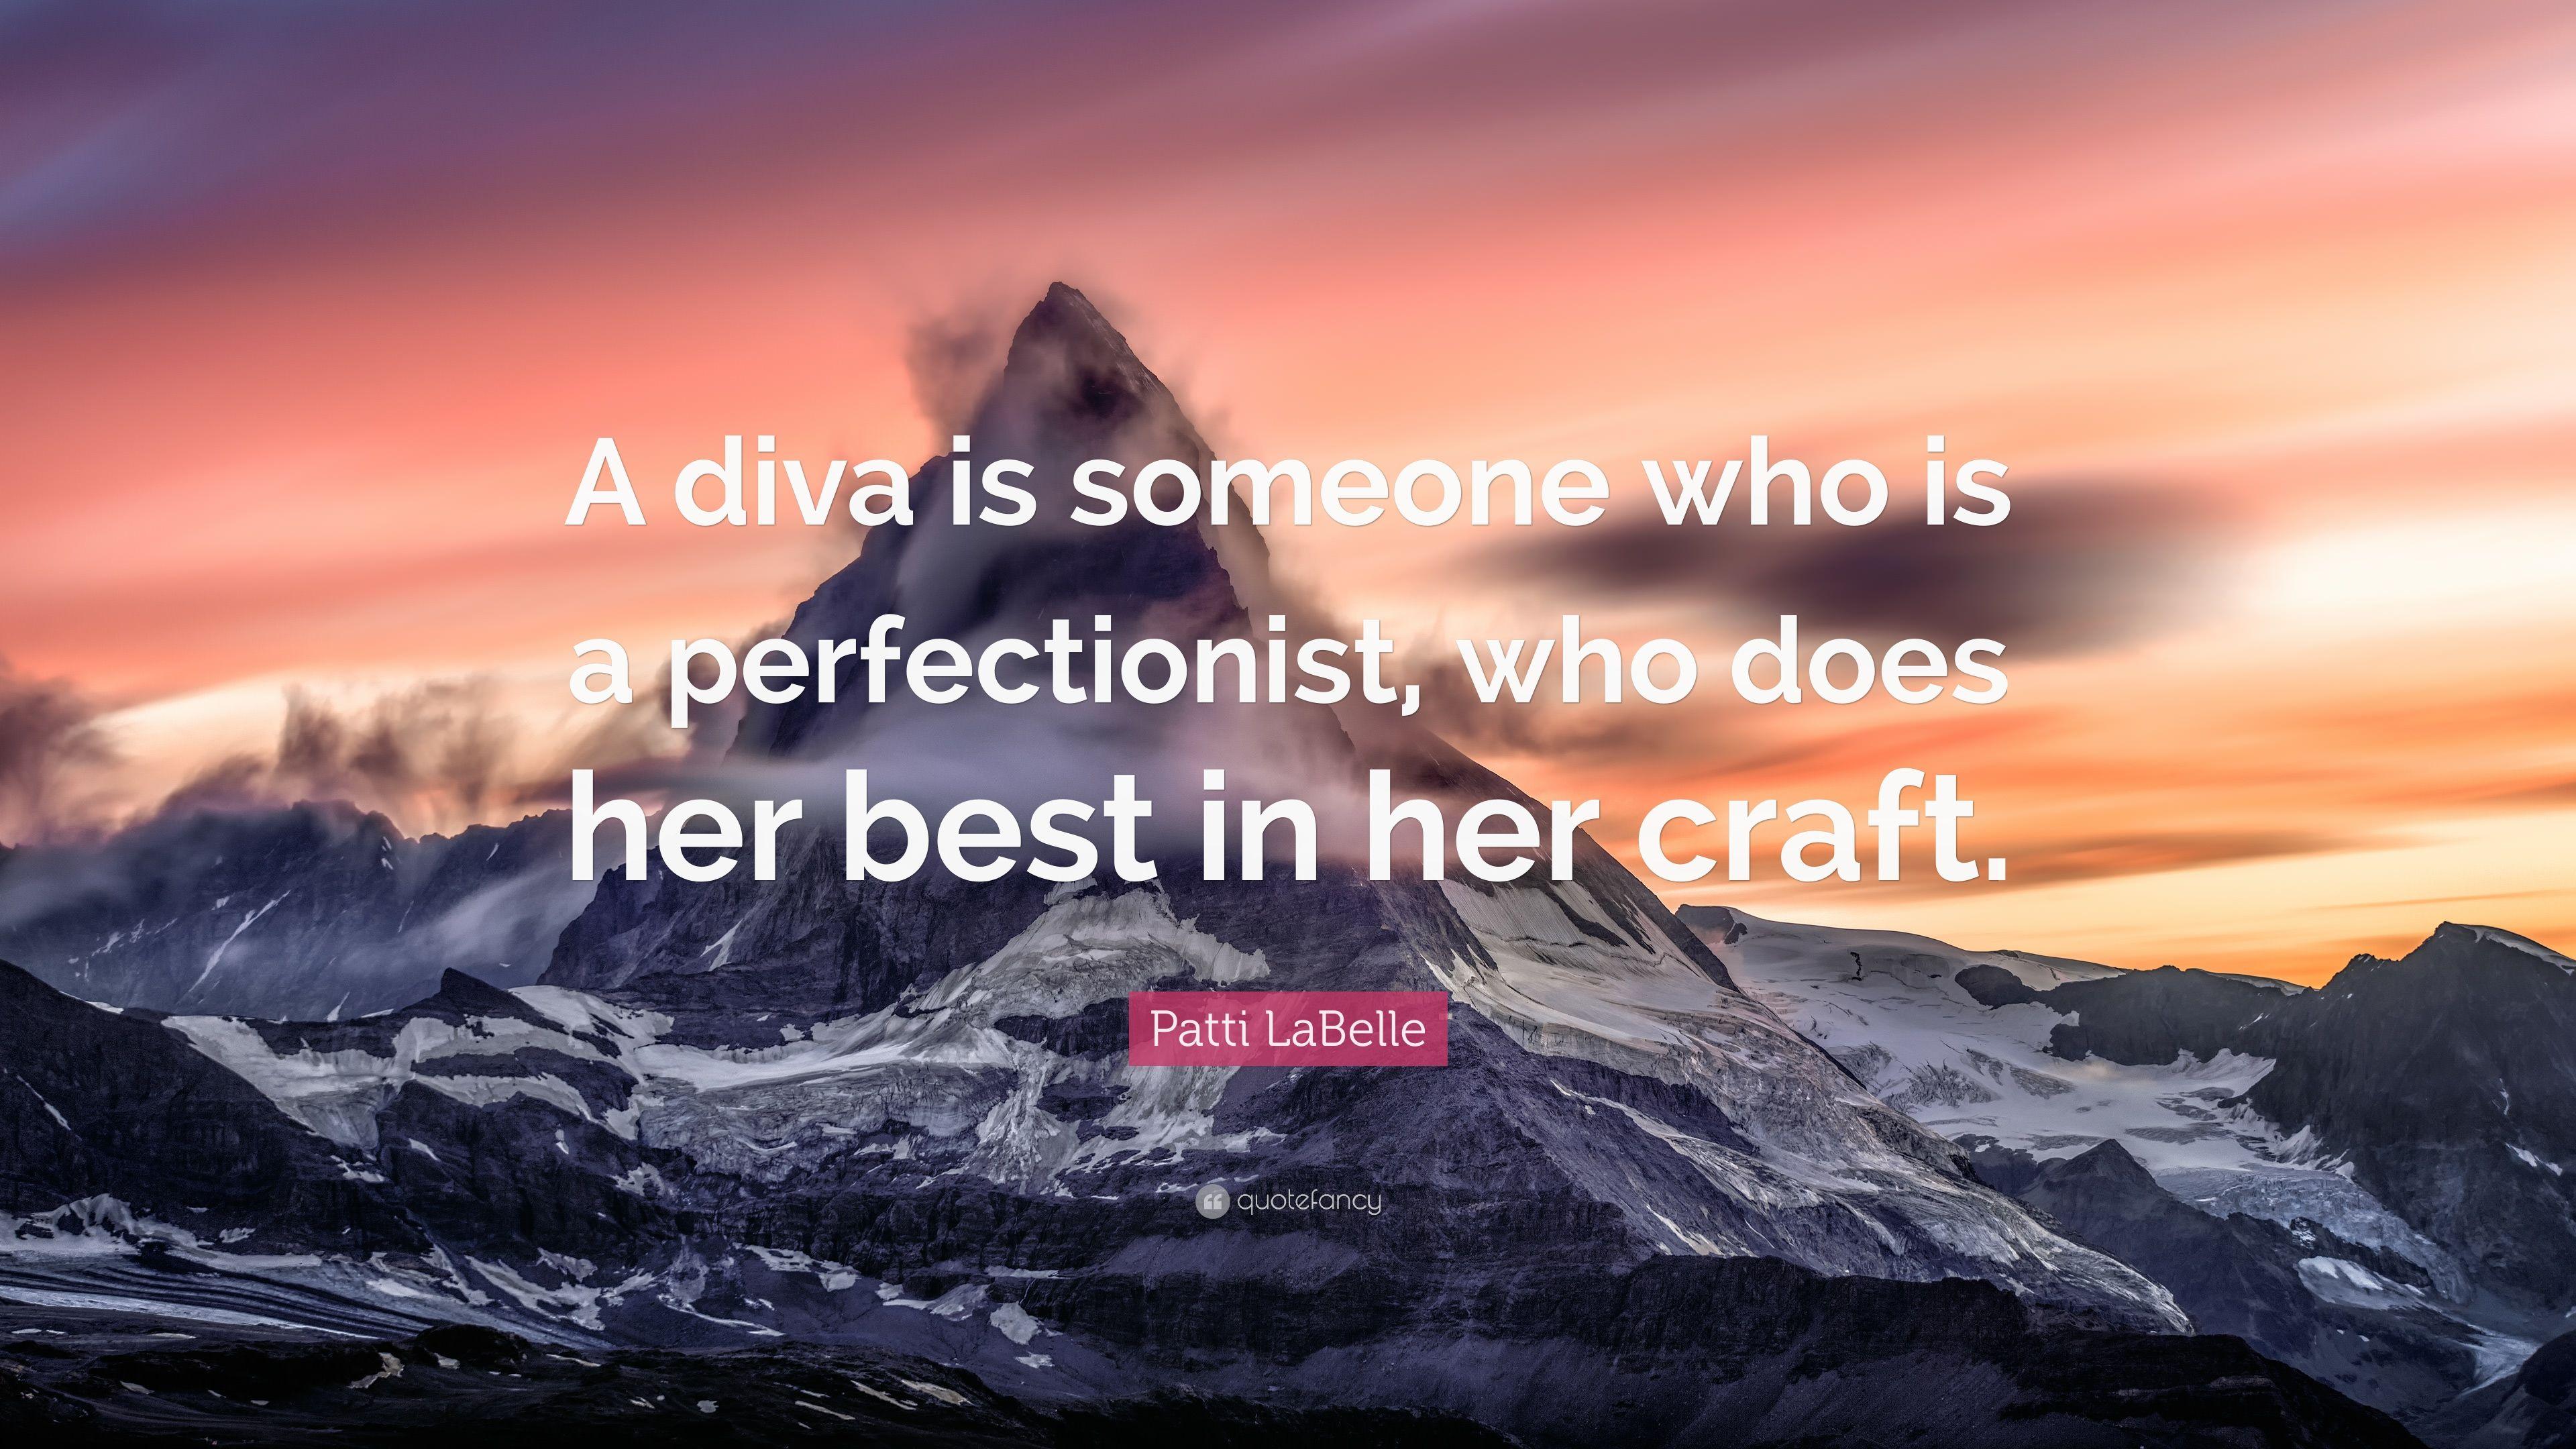 Patti LaBelle Quote: “A diva is someone who is a perfectionist, who